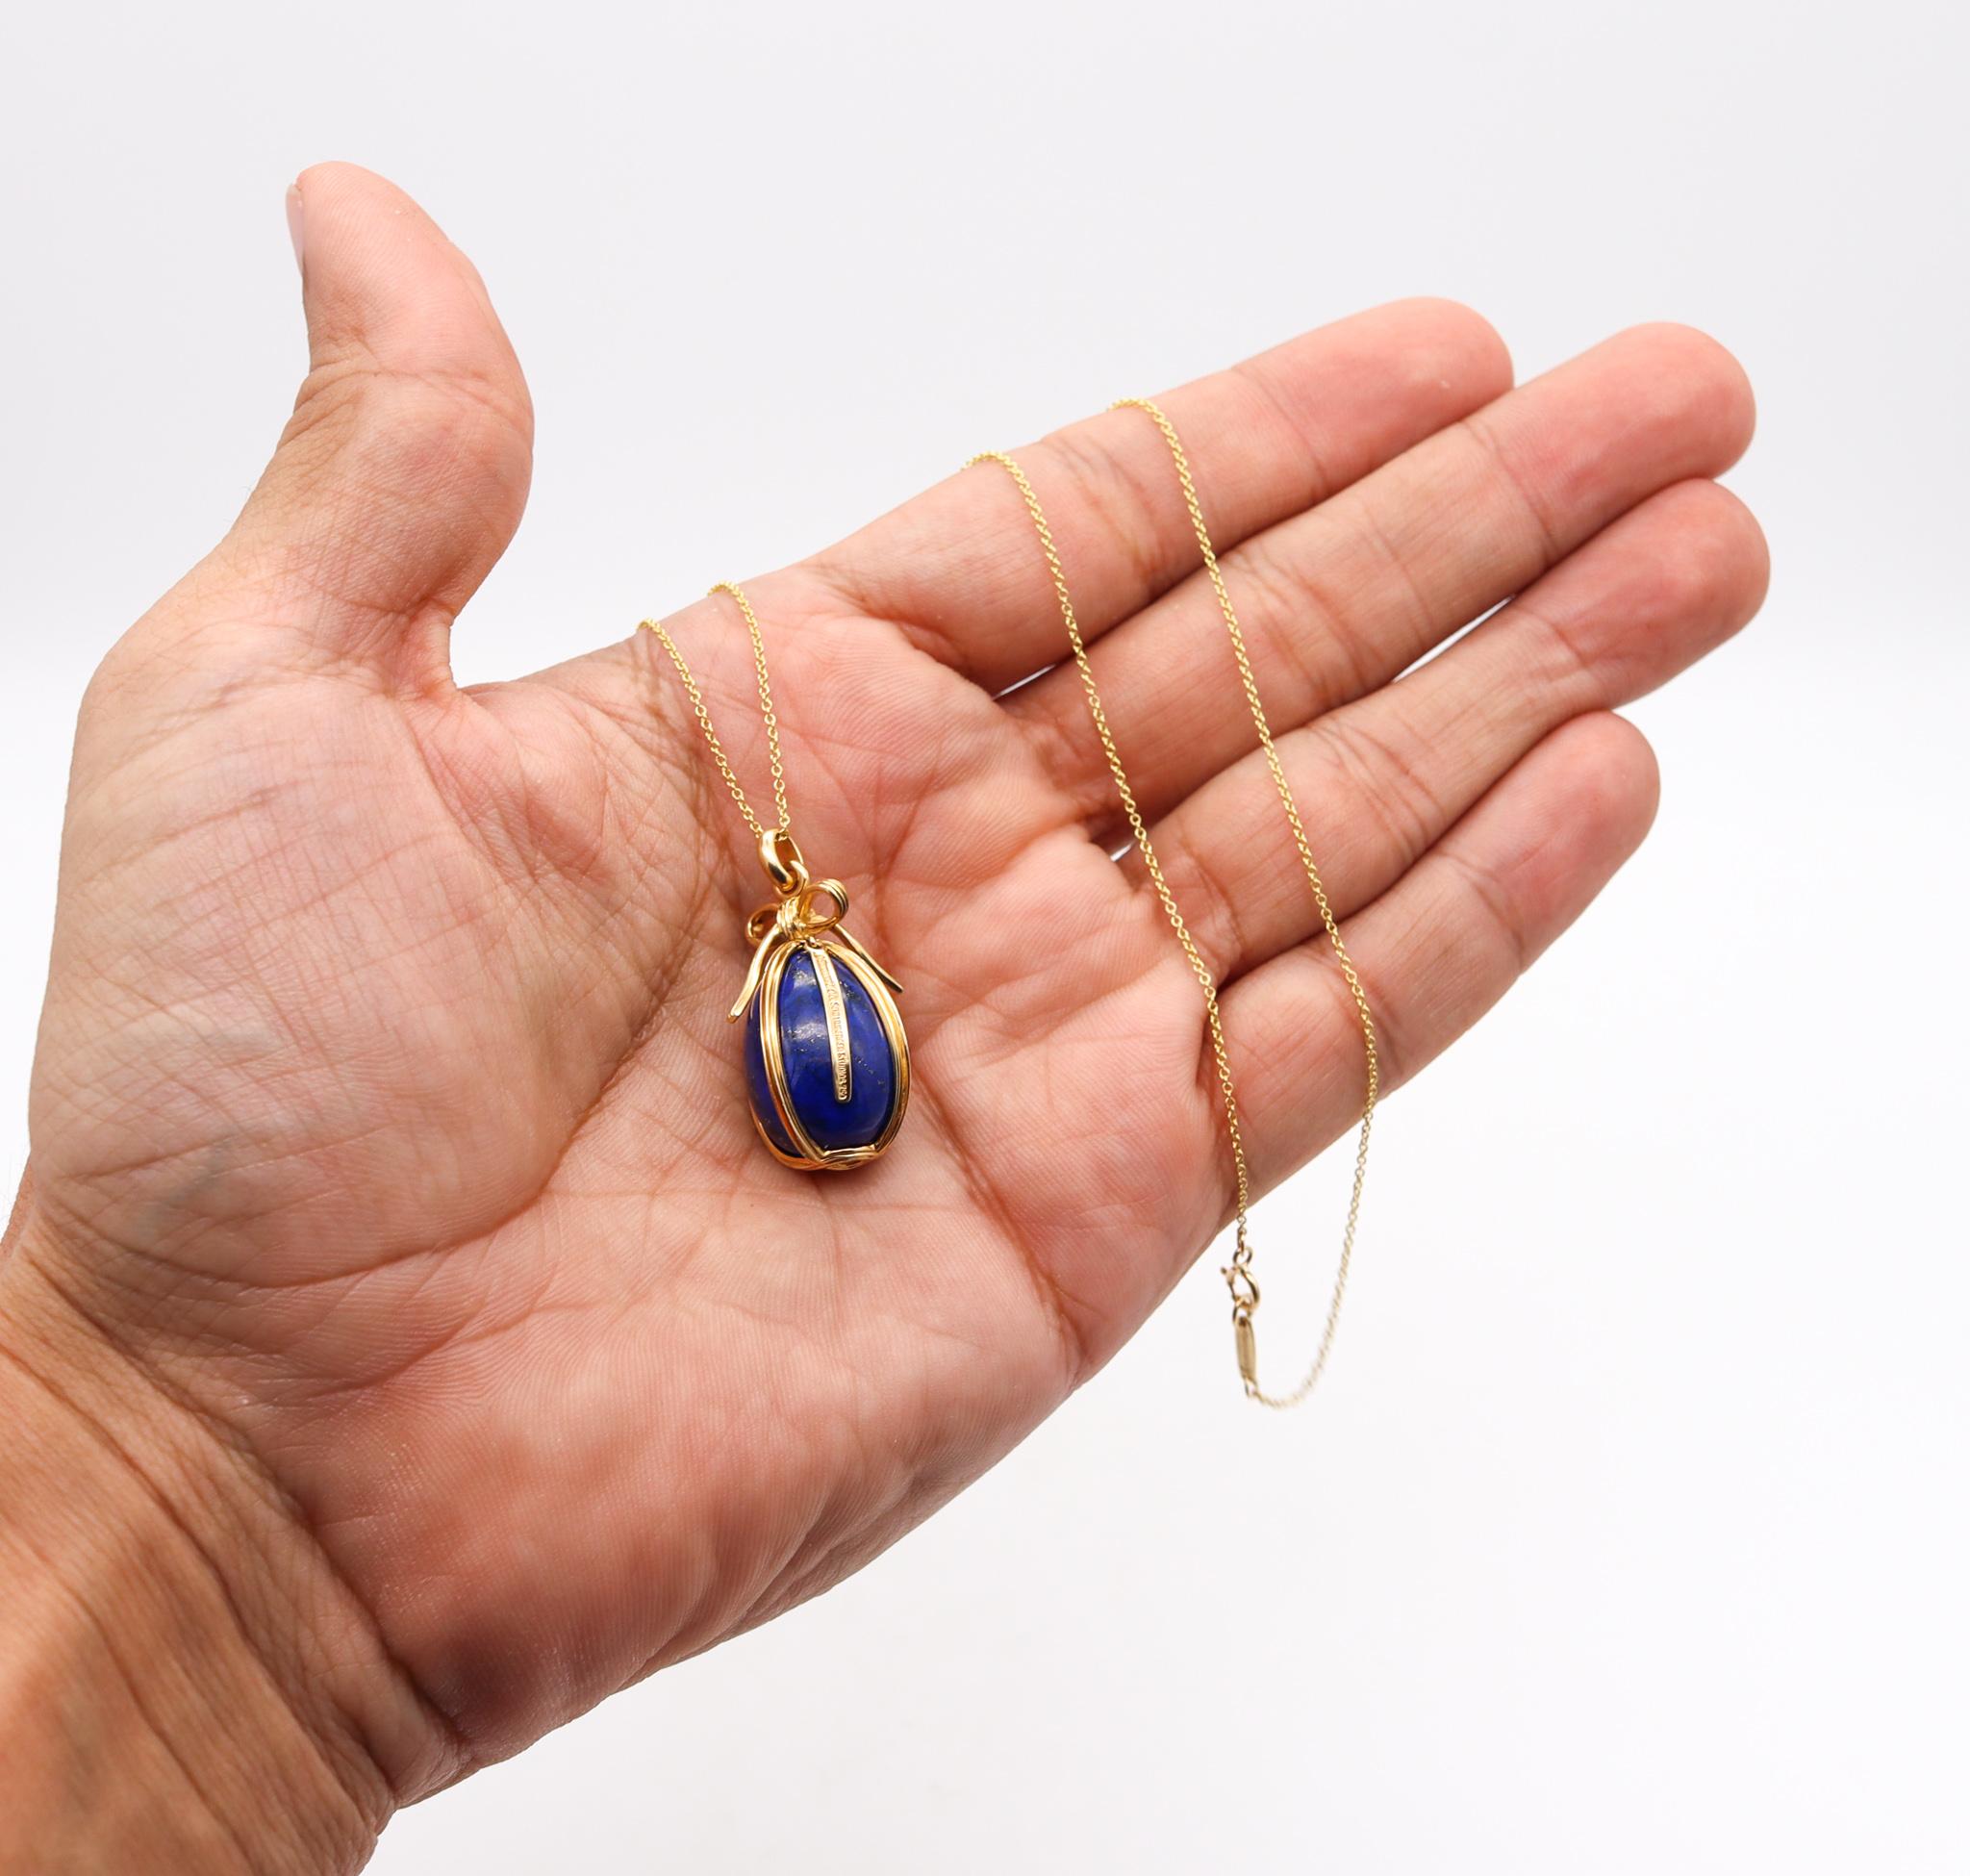 Modernist Tiffany Co. 1976 Schlumberger Egg Necklace Chain in 18kt Gold with Lapis Lazuli